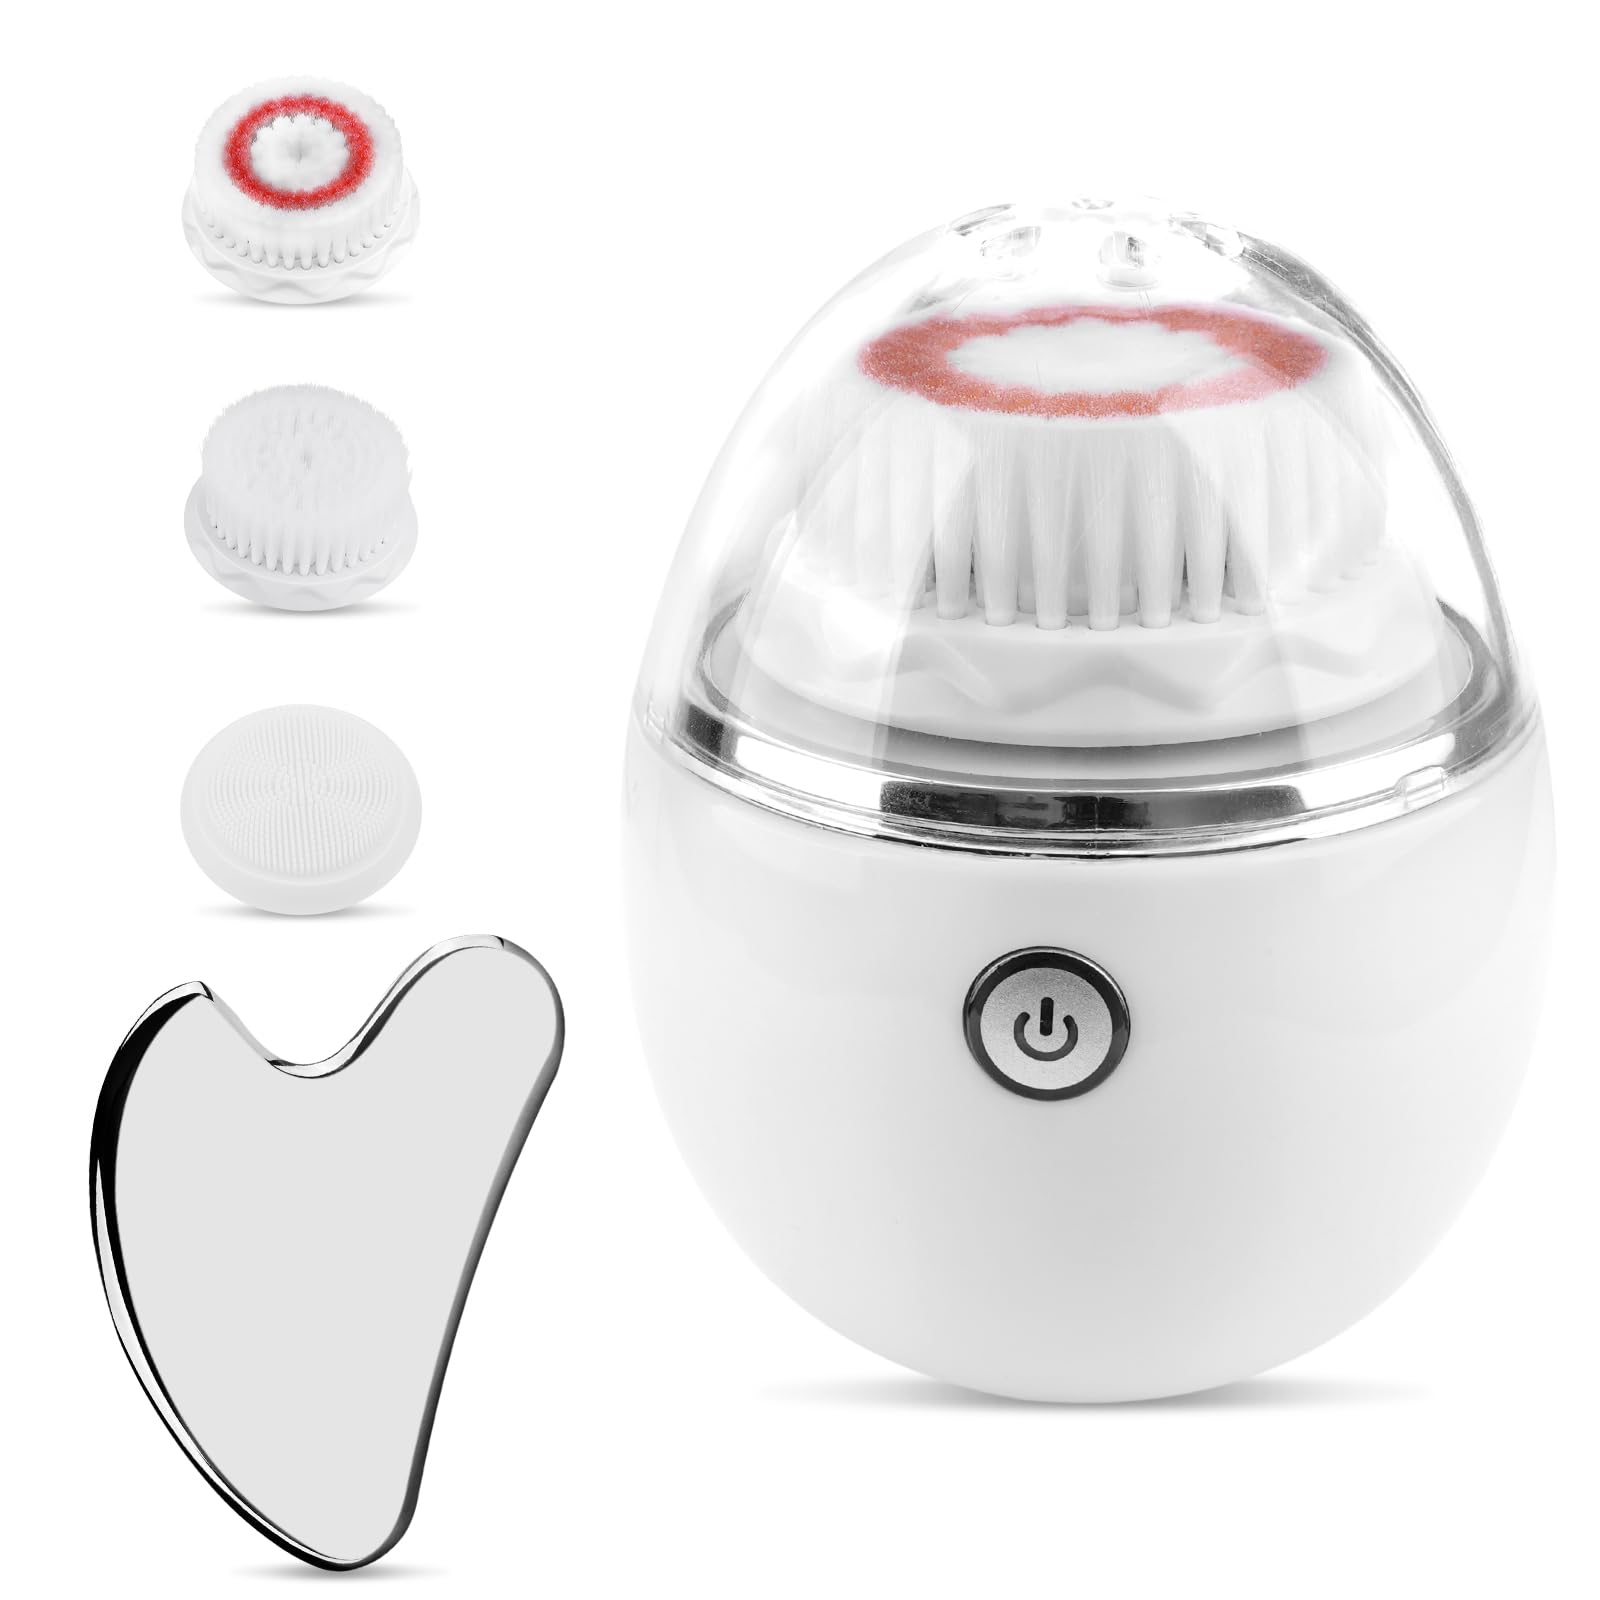 Egg Shaped Facial Cleansing Brush- Hotodeal Electric Waterproof Wireless Face Scrubber with 3 Brush Heads